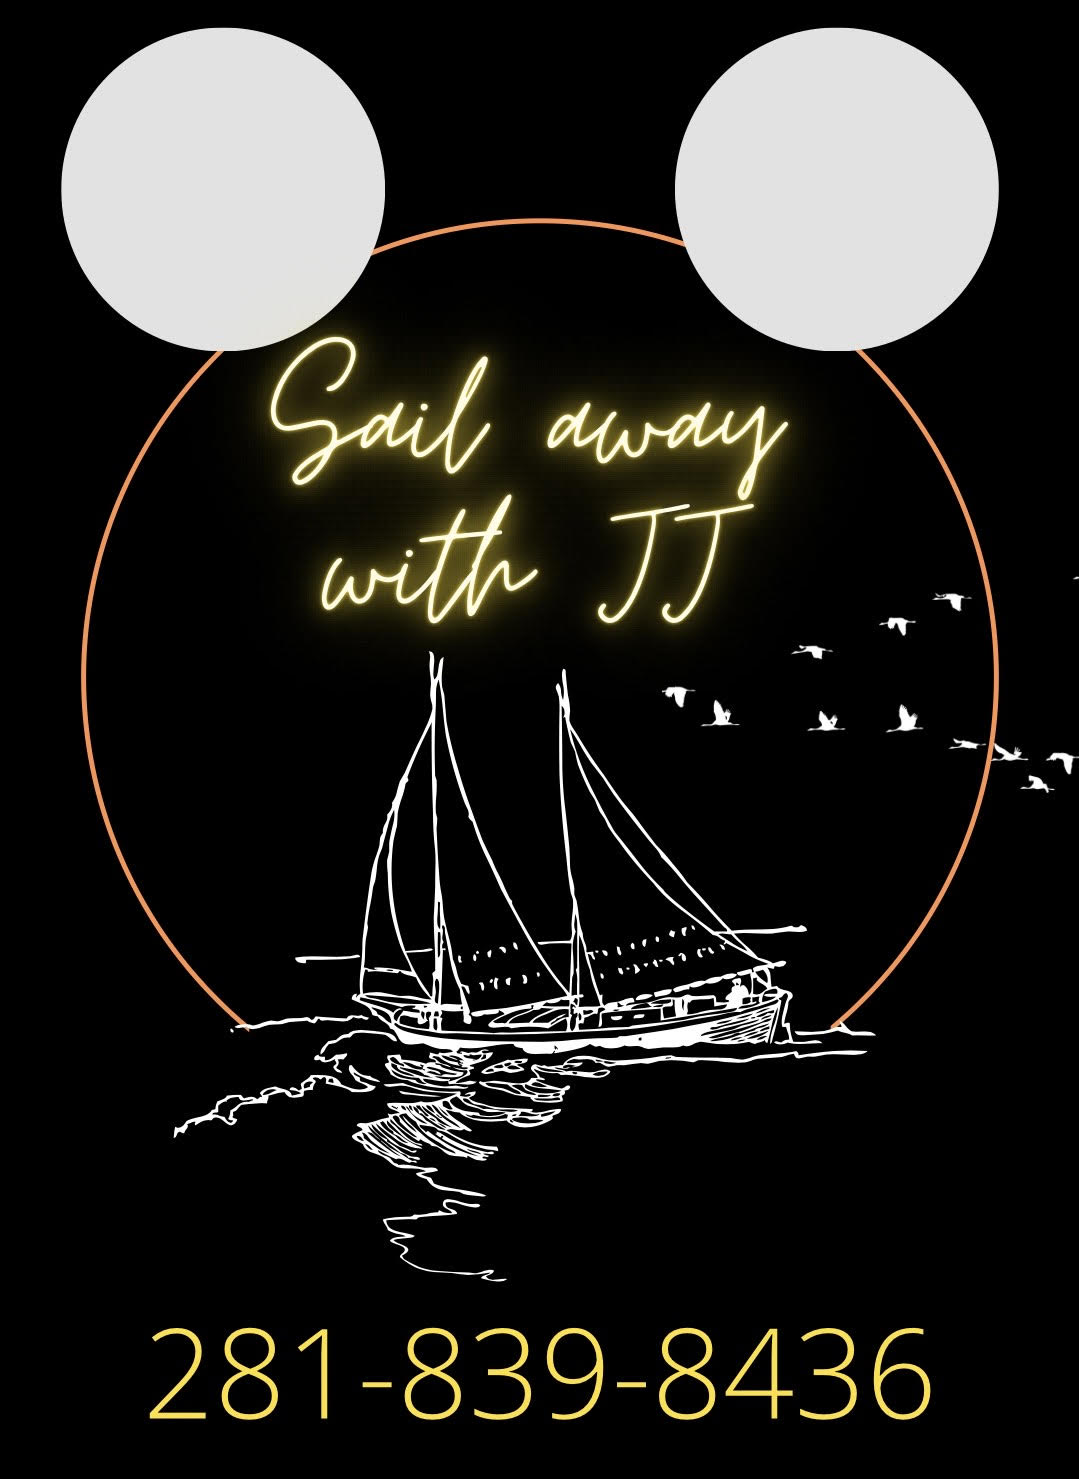 Sail away with JJ